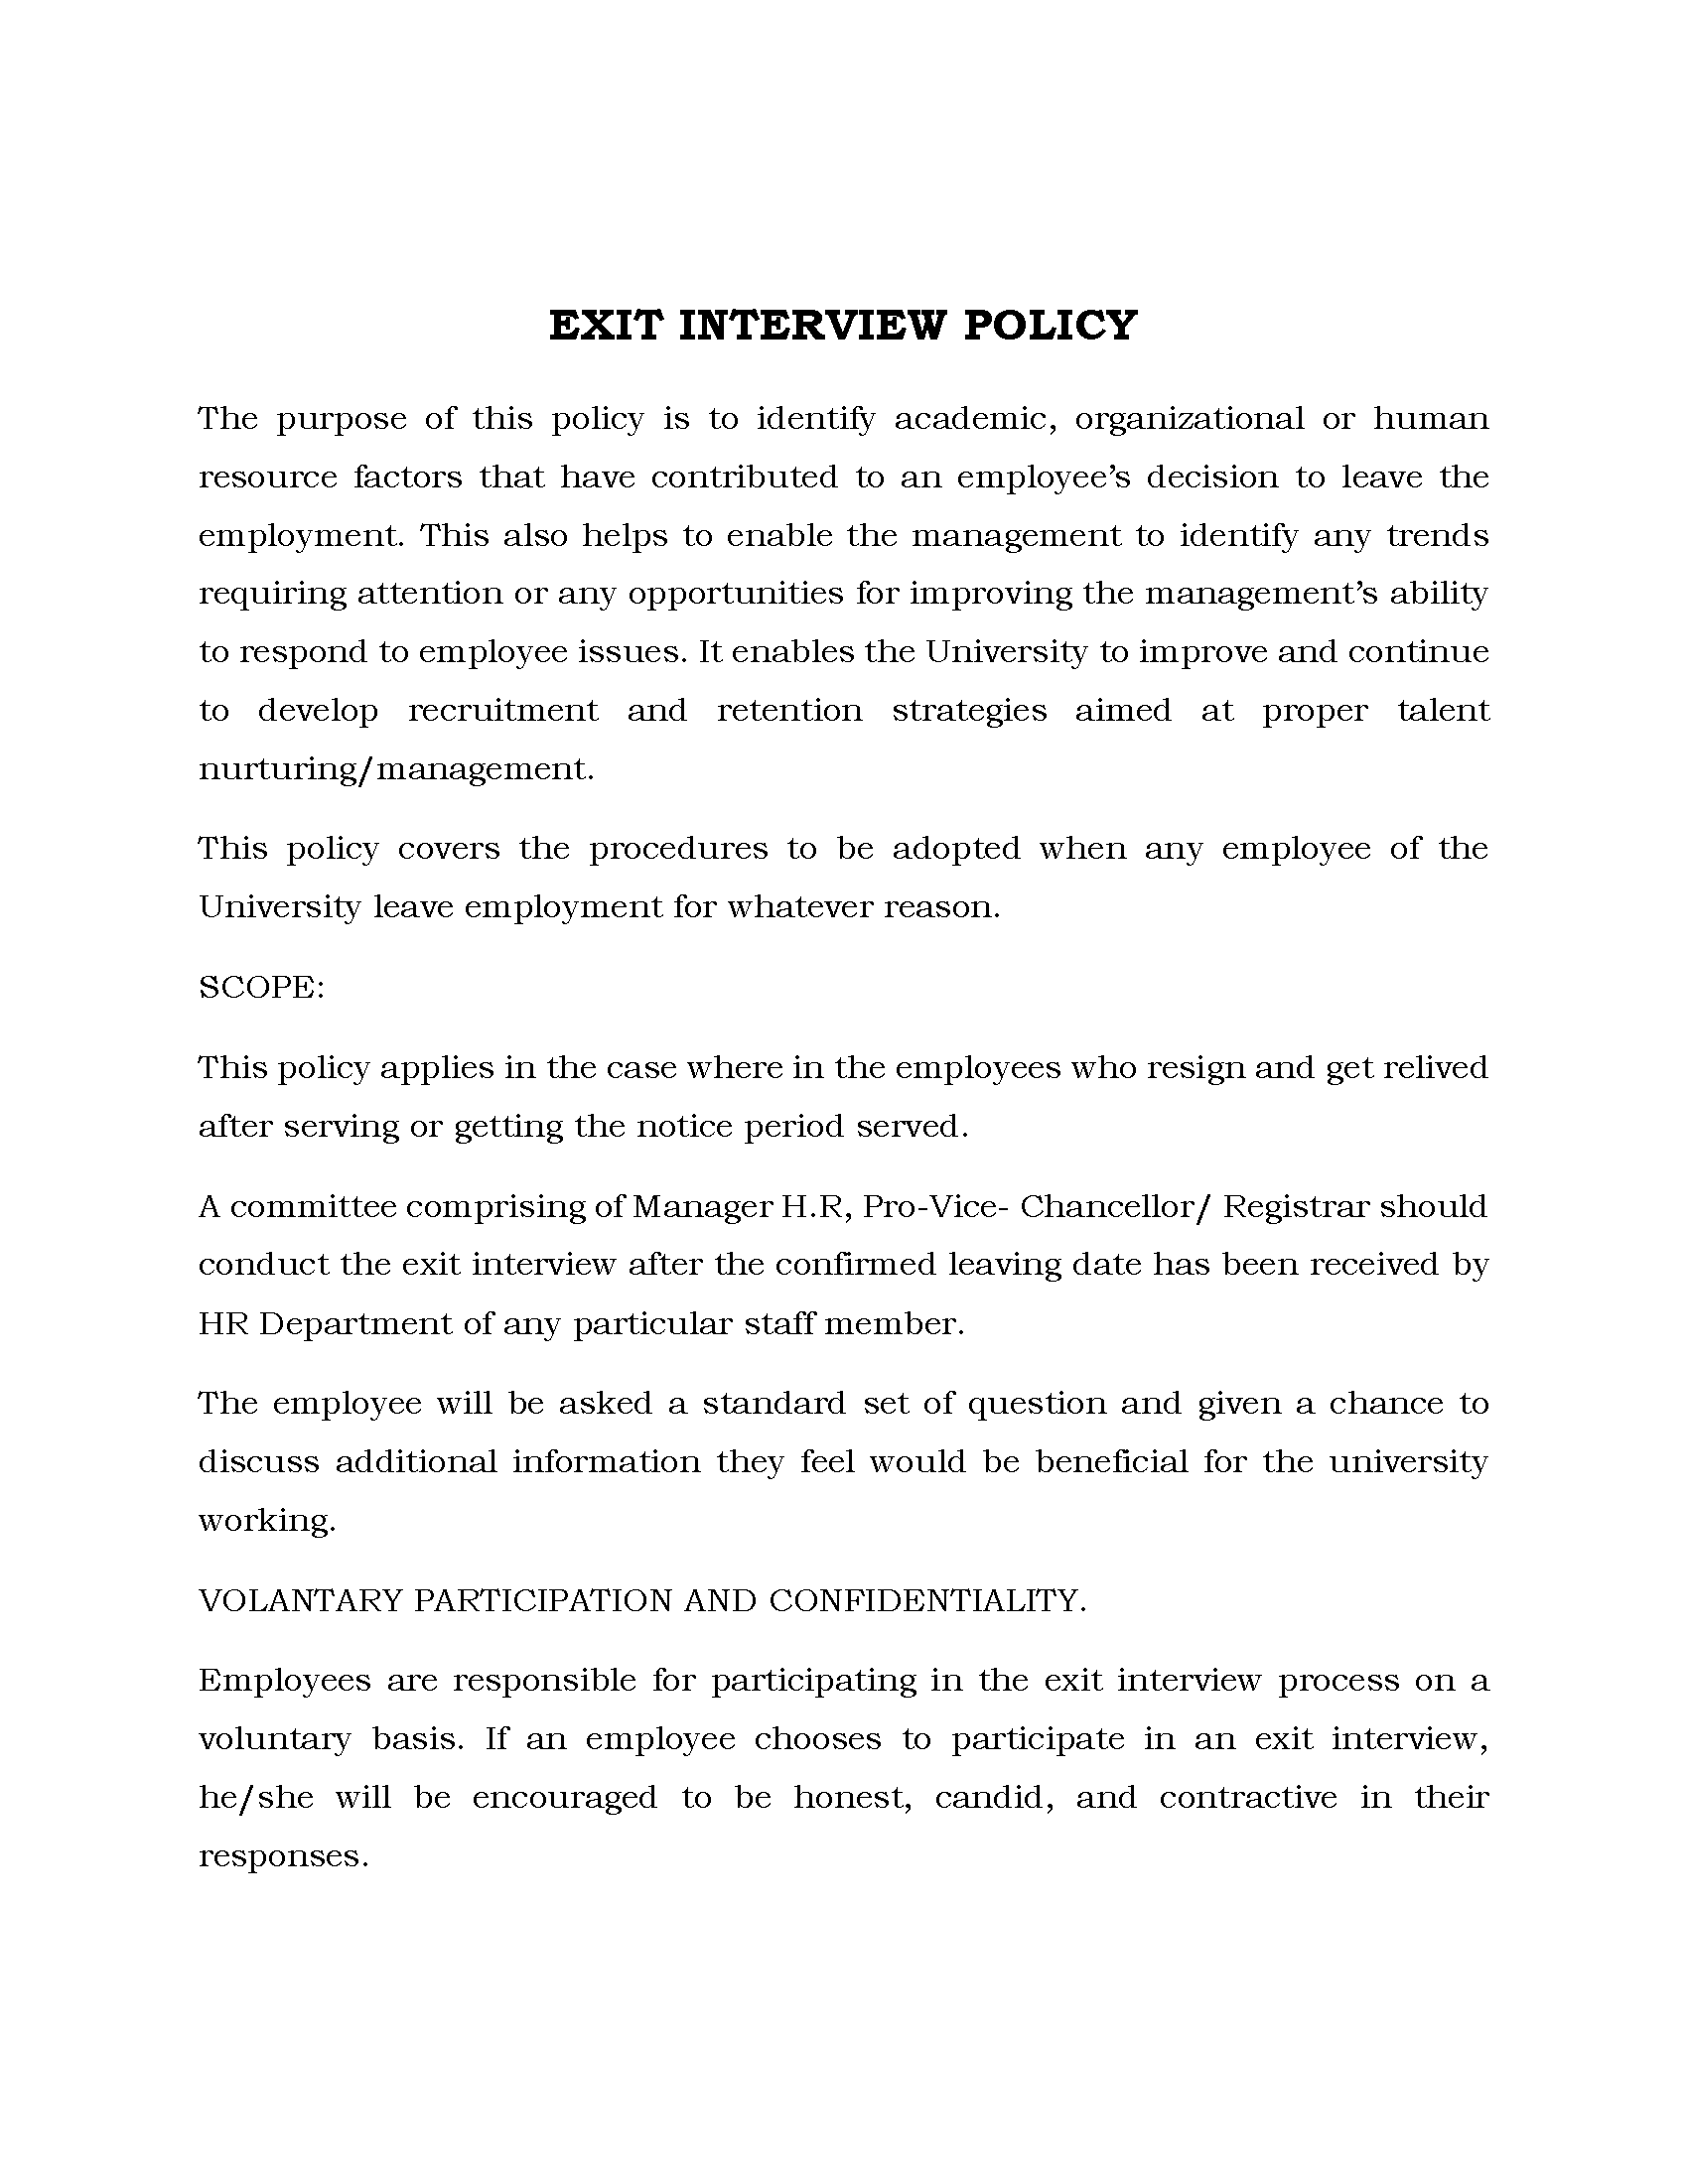 14 - Exit Interview Policy